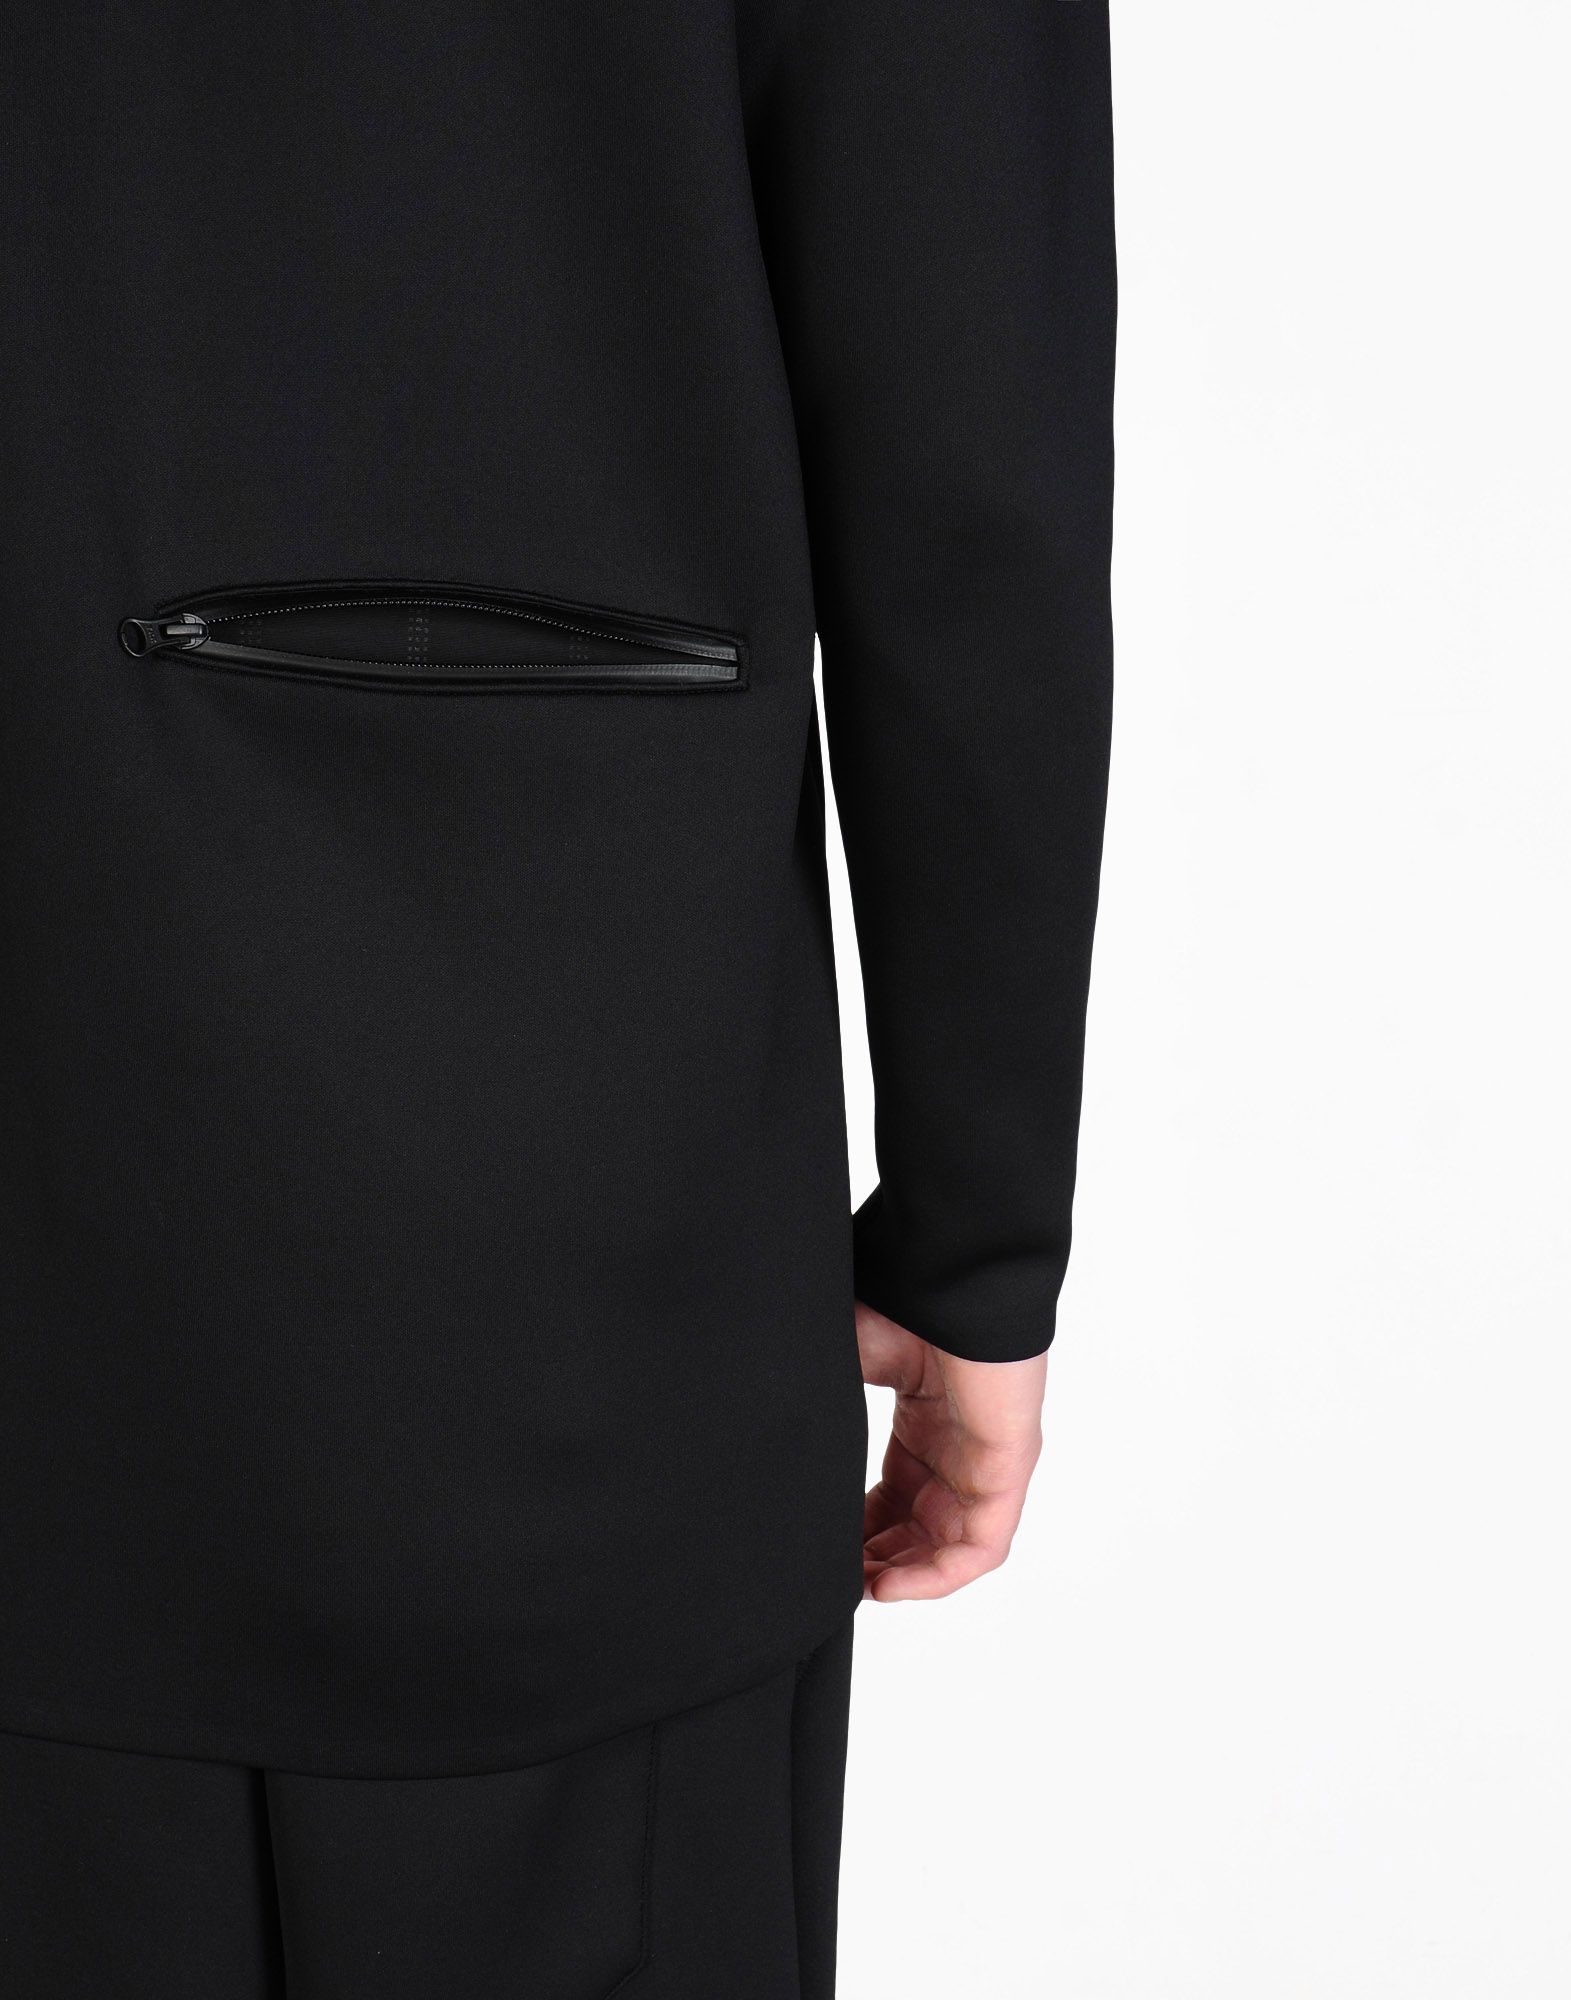 Y 3 SPACER JACKET for Men | Adidas Y-3 Official Store